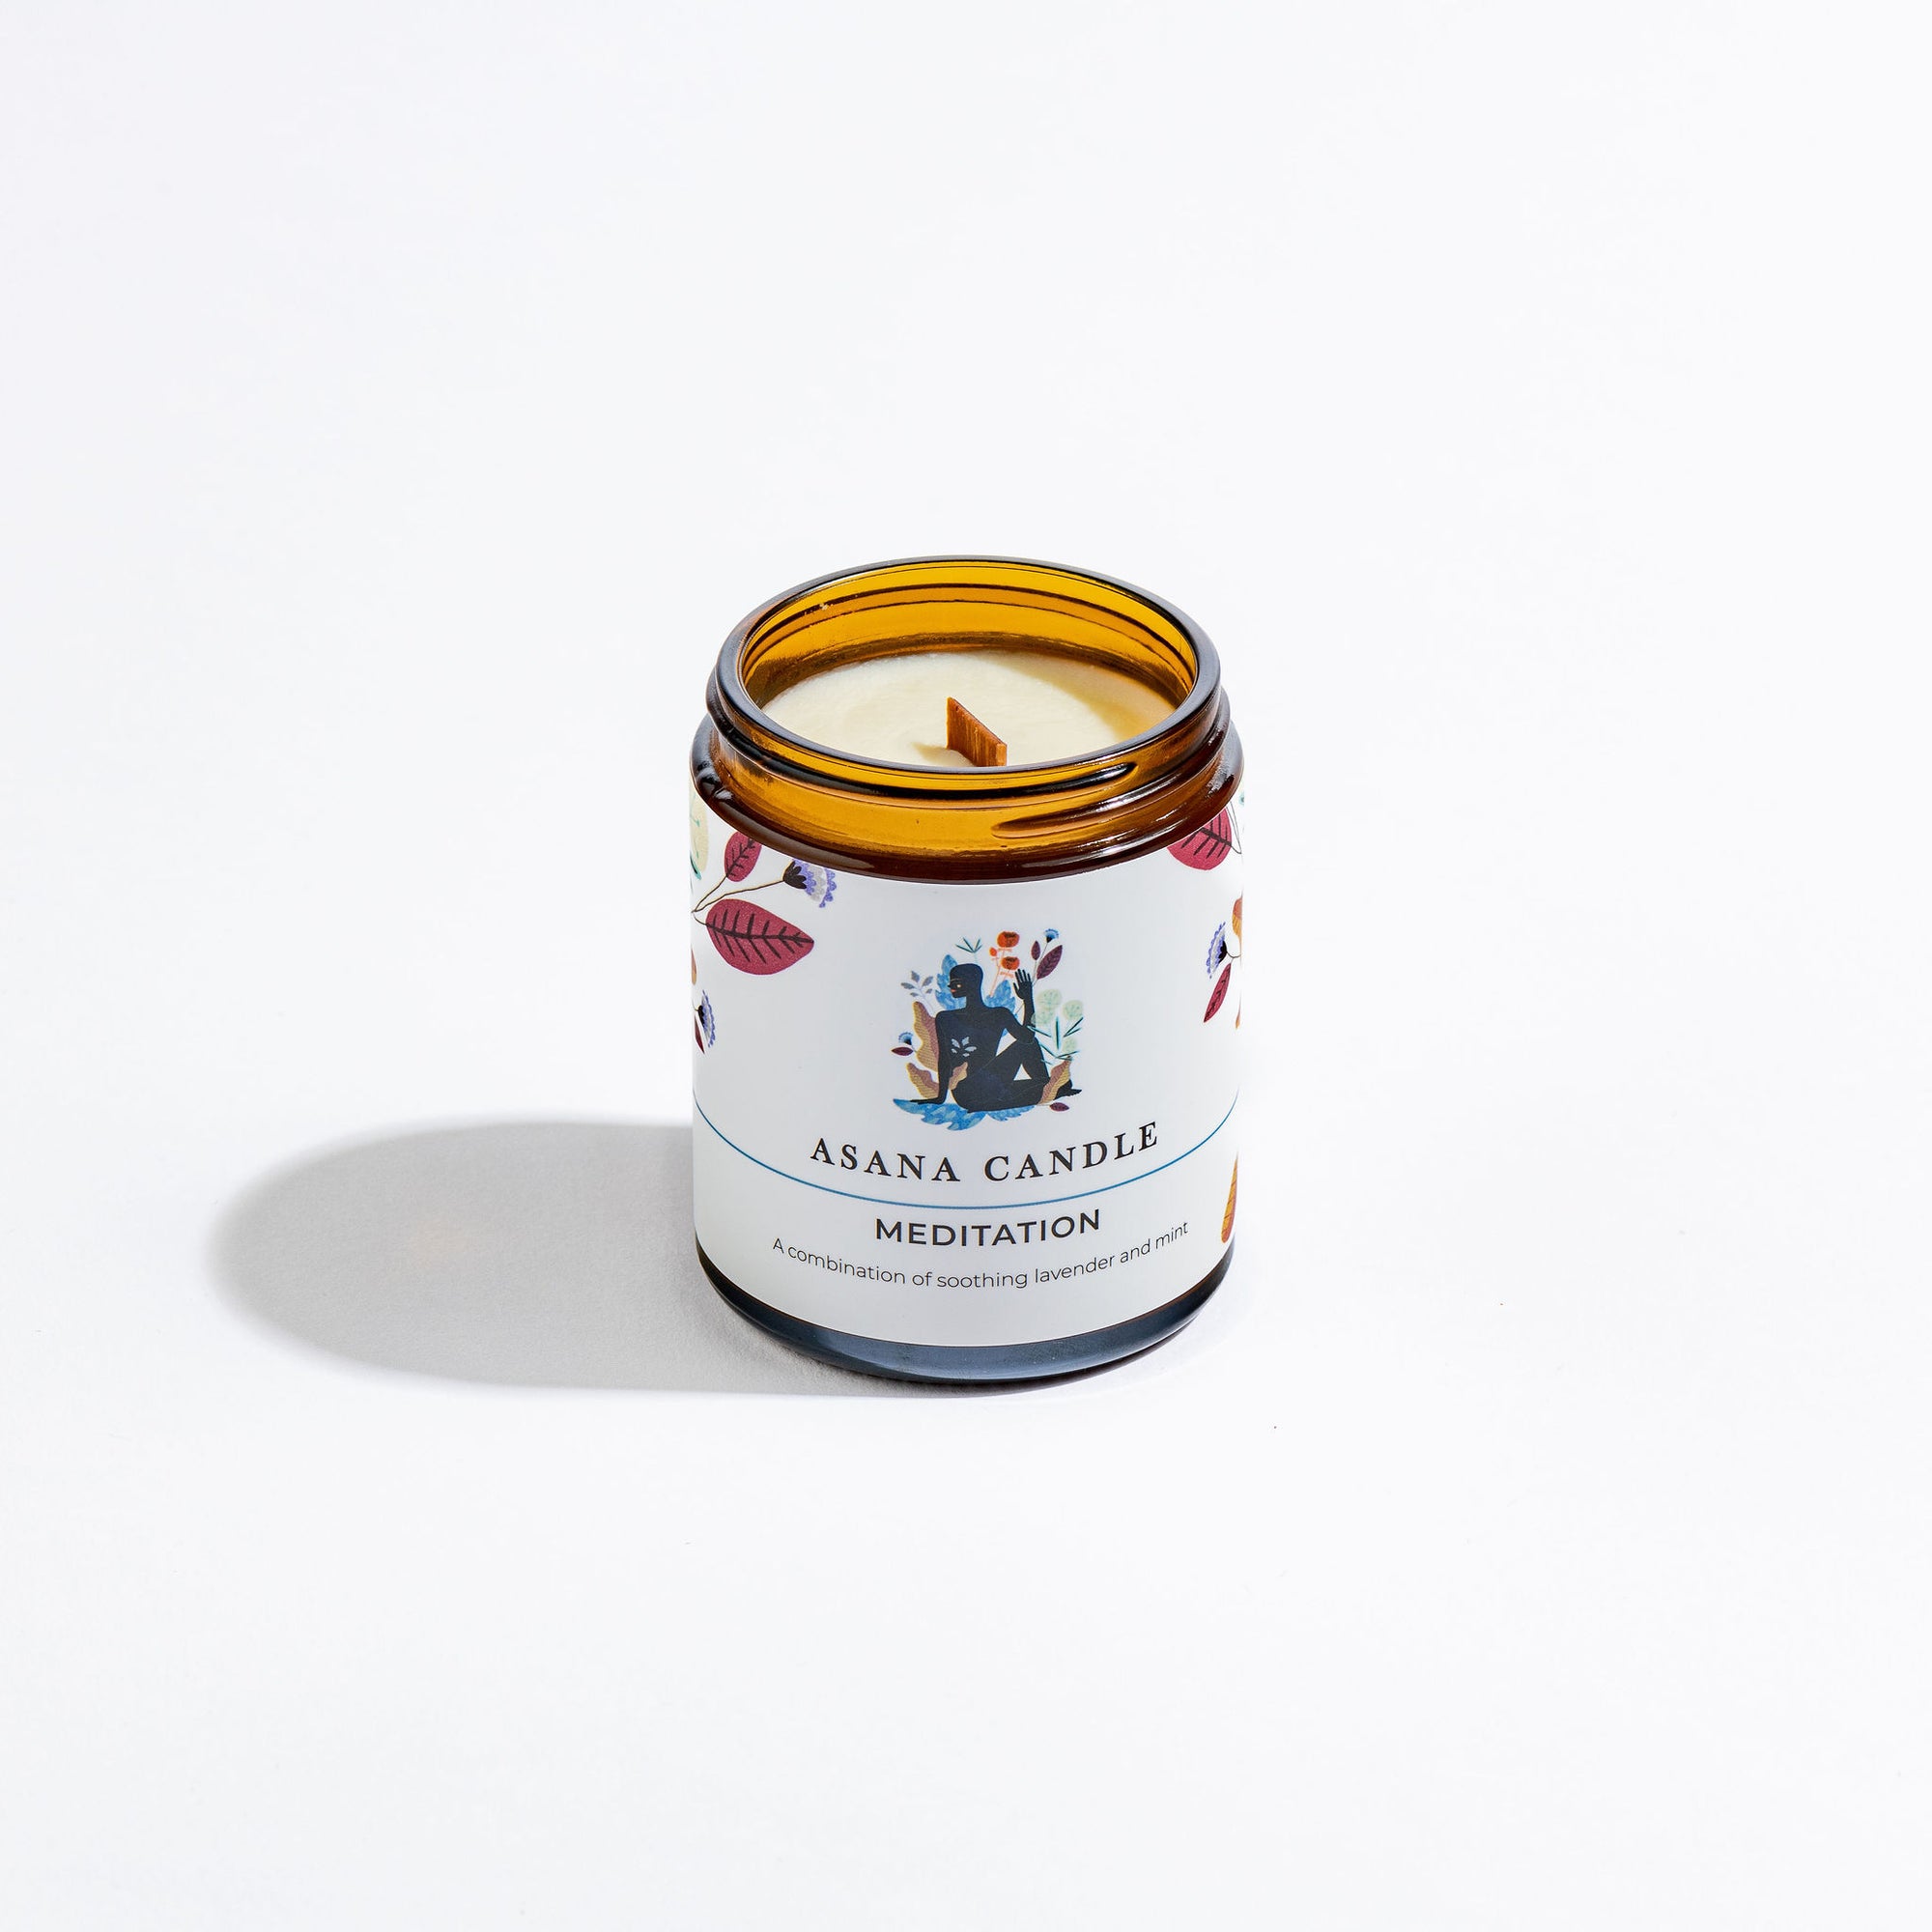 Meditation - Asana Candle | Luxury Candles & Home Fragrances by Light + Glo